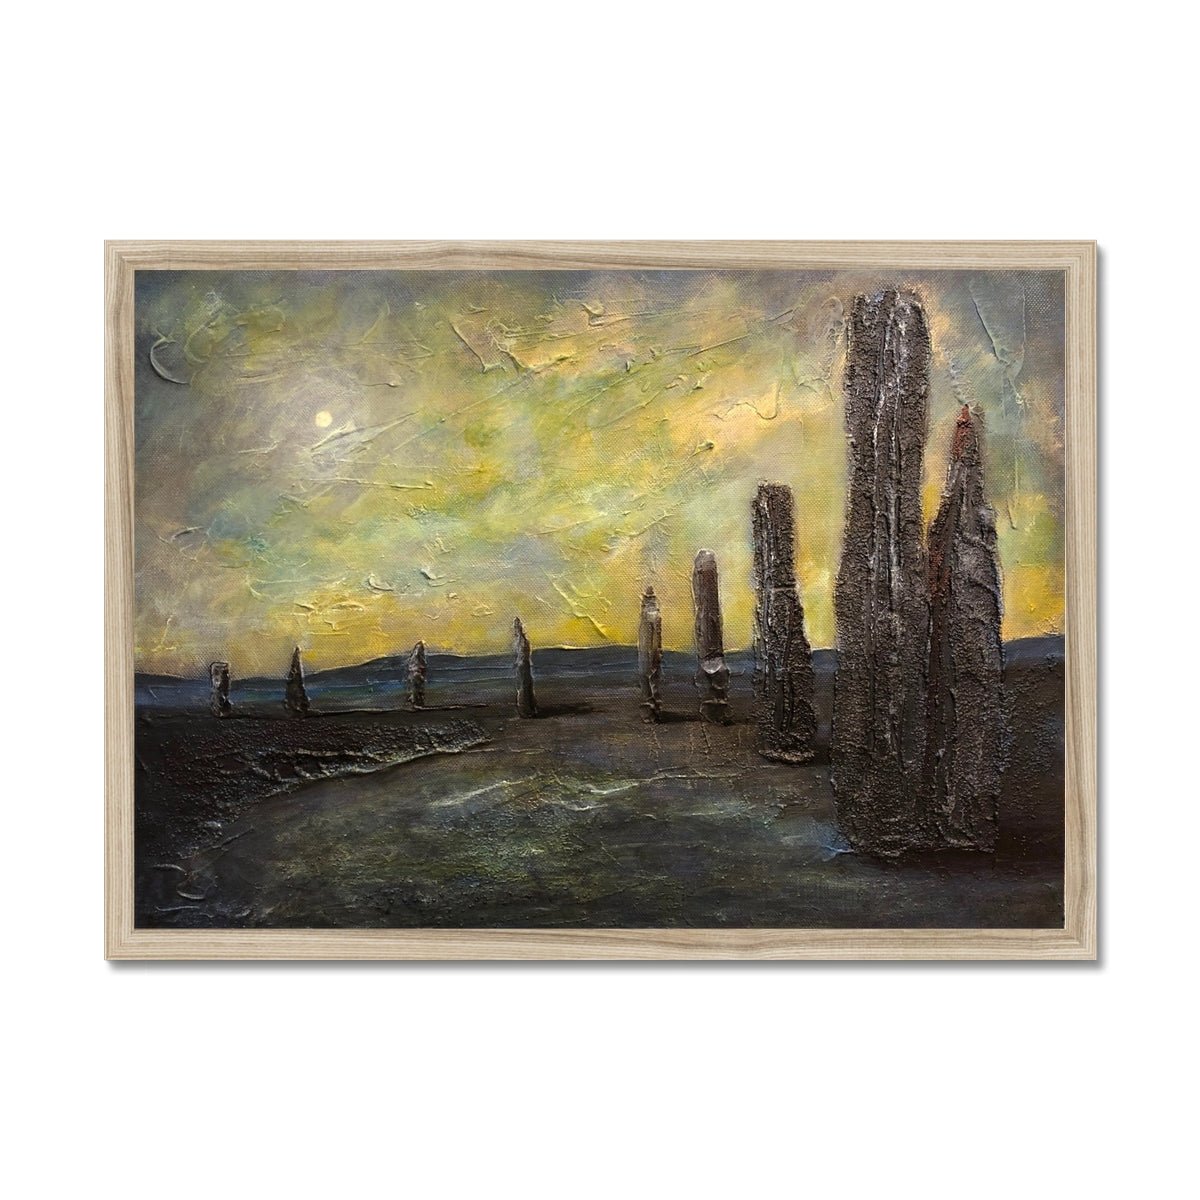 An Ethereal Ring Of Brodgar Orkney Painting | Framed Prints From Scotland-Framed Prints-Orkney Art Gallery-A2 Landscape-Natural Frame-Paintings, Prints, Homeware, Art Gifts From Scotland By Scottish Artist Kevin Hunter